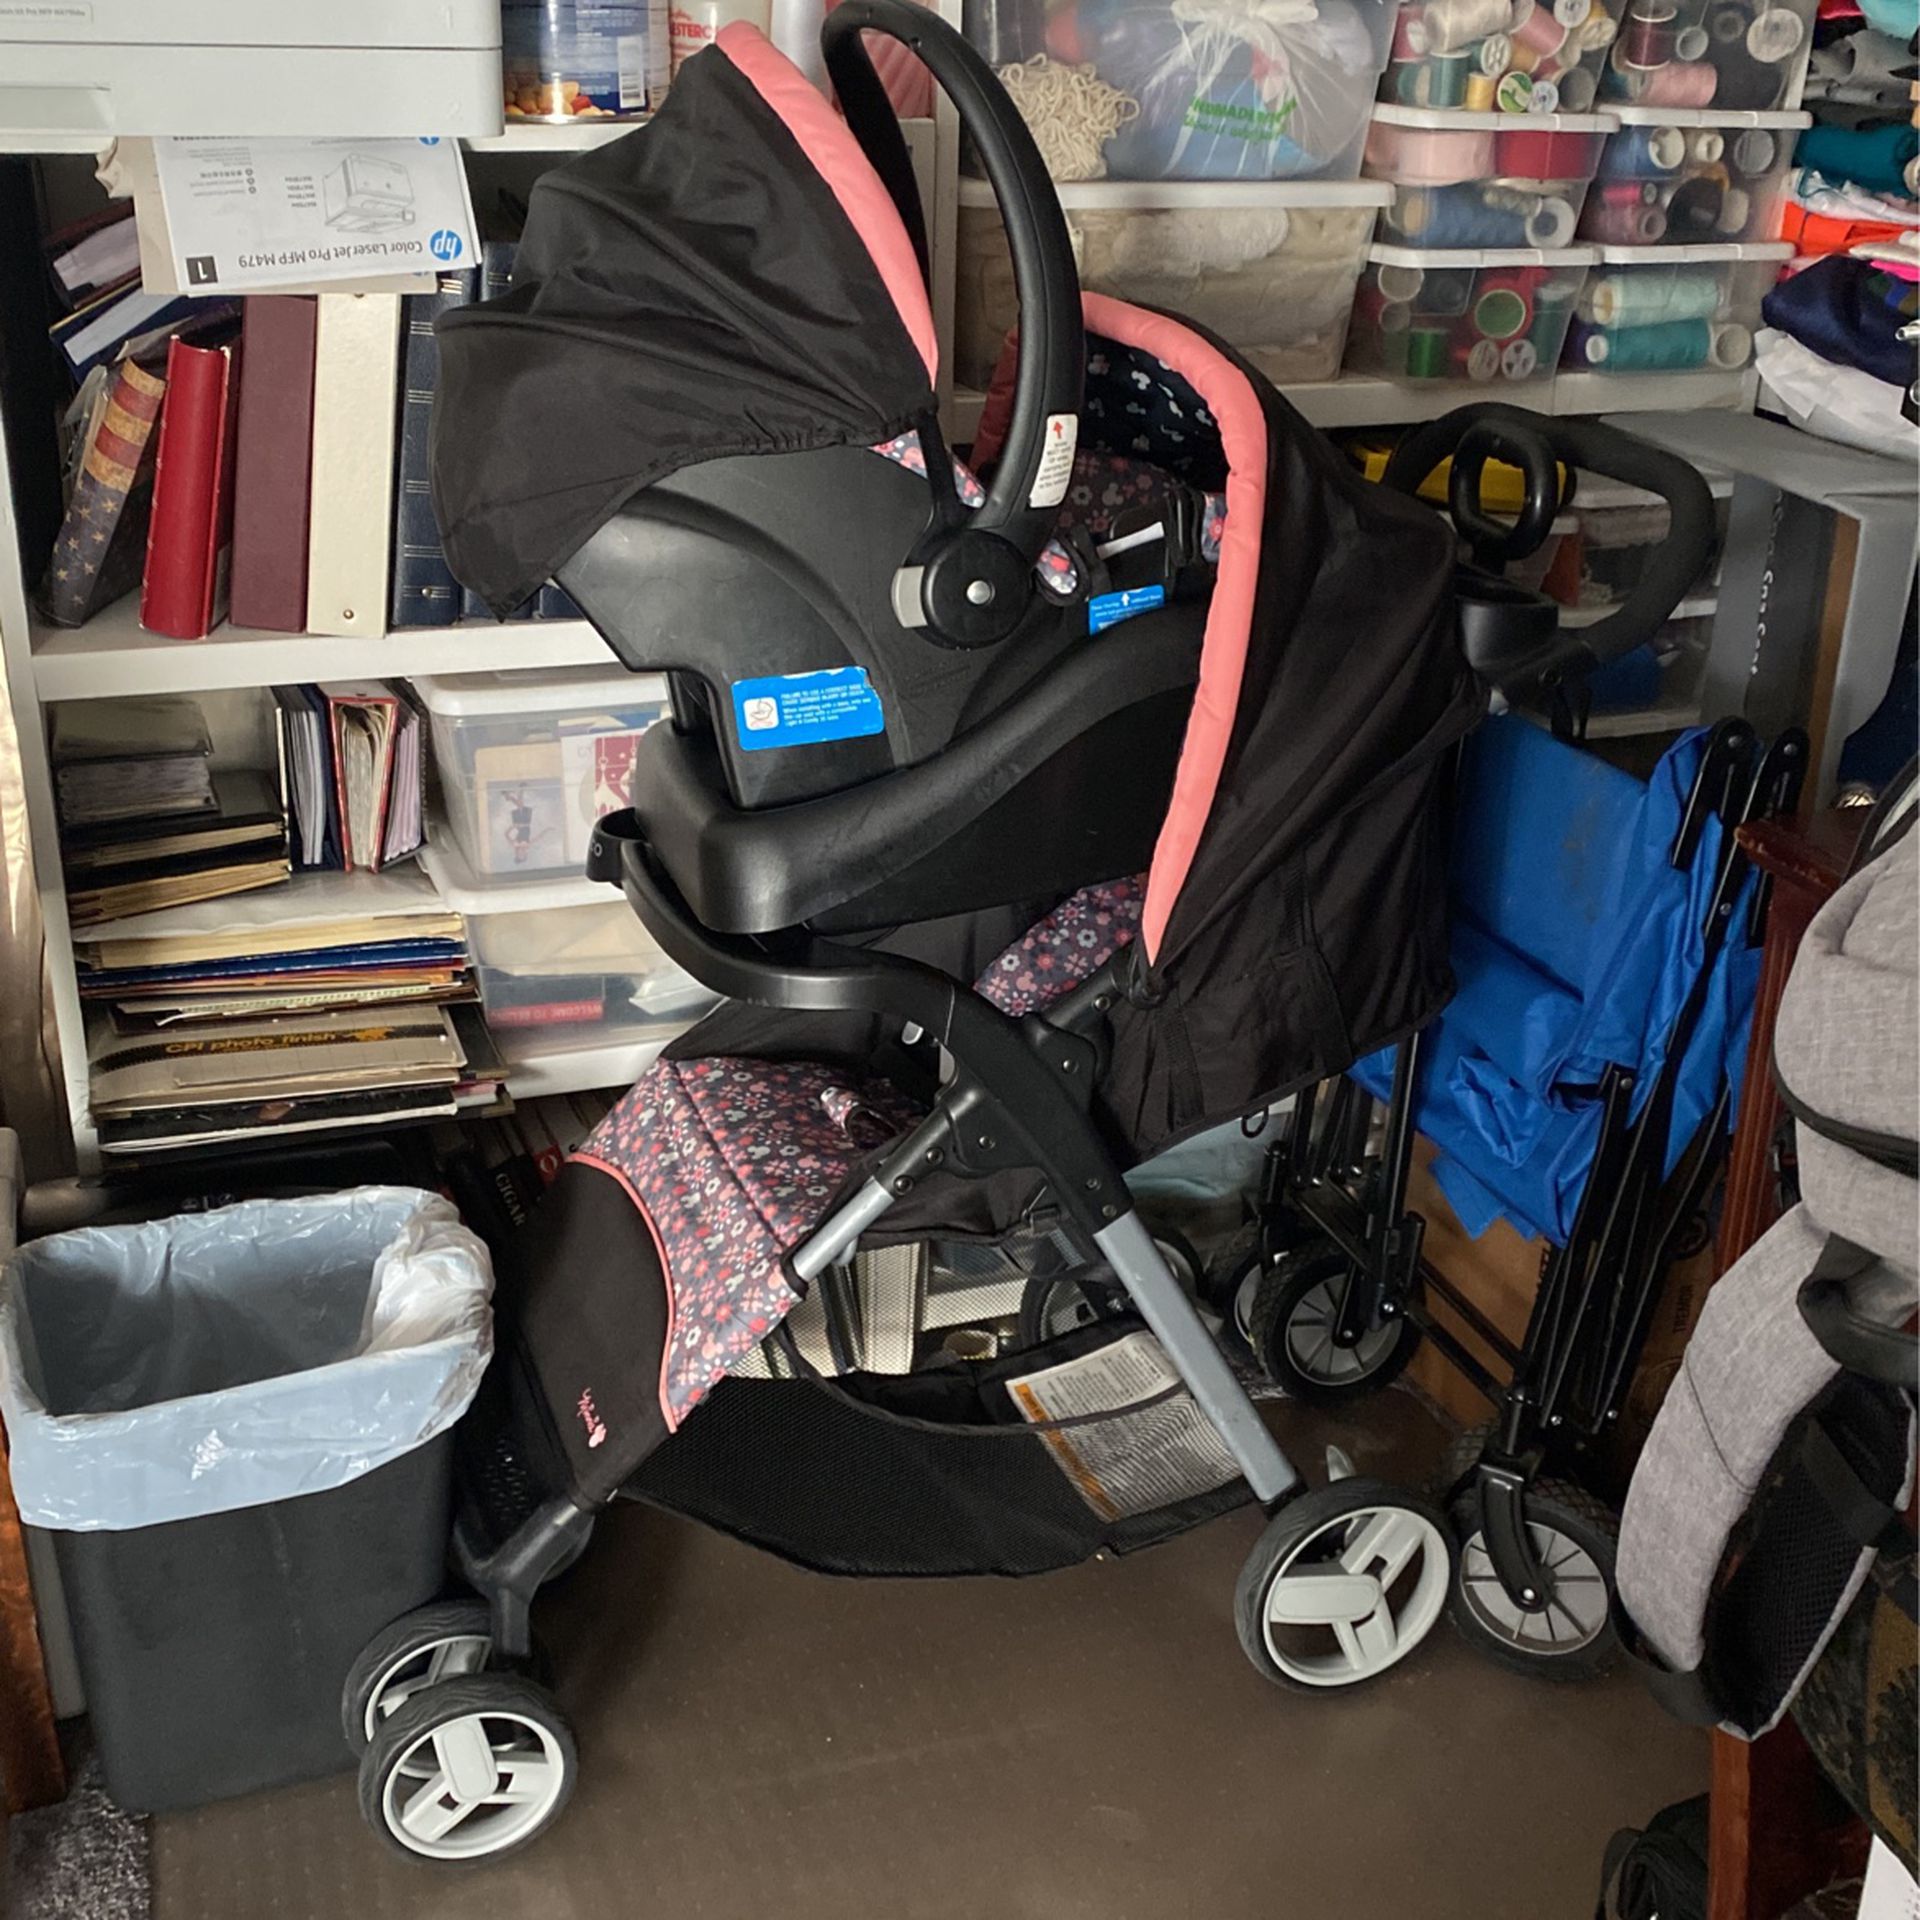 3 Items for Sale….stroller And Infant Seat…..highchair And Booster Seat….baby With Linens And Toys